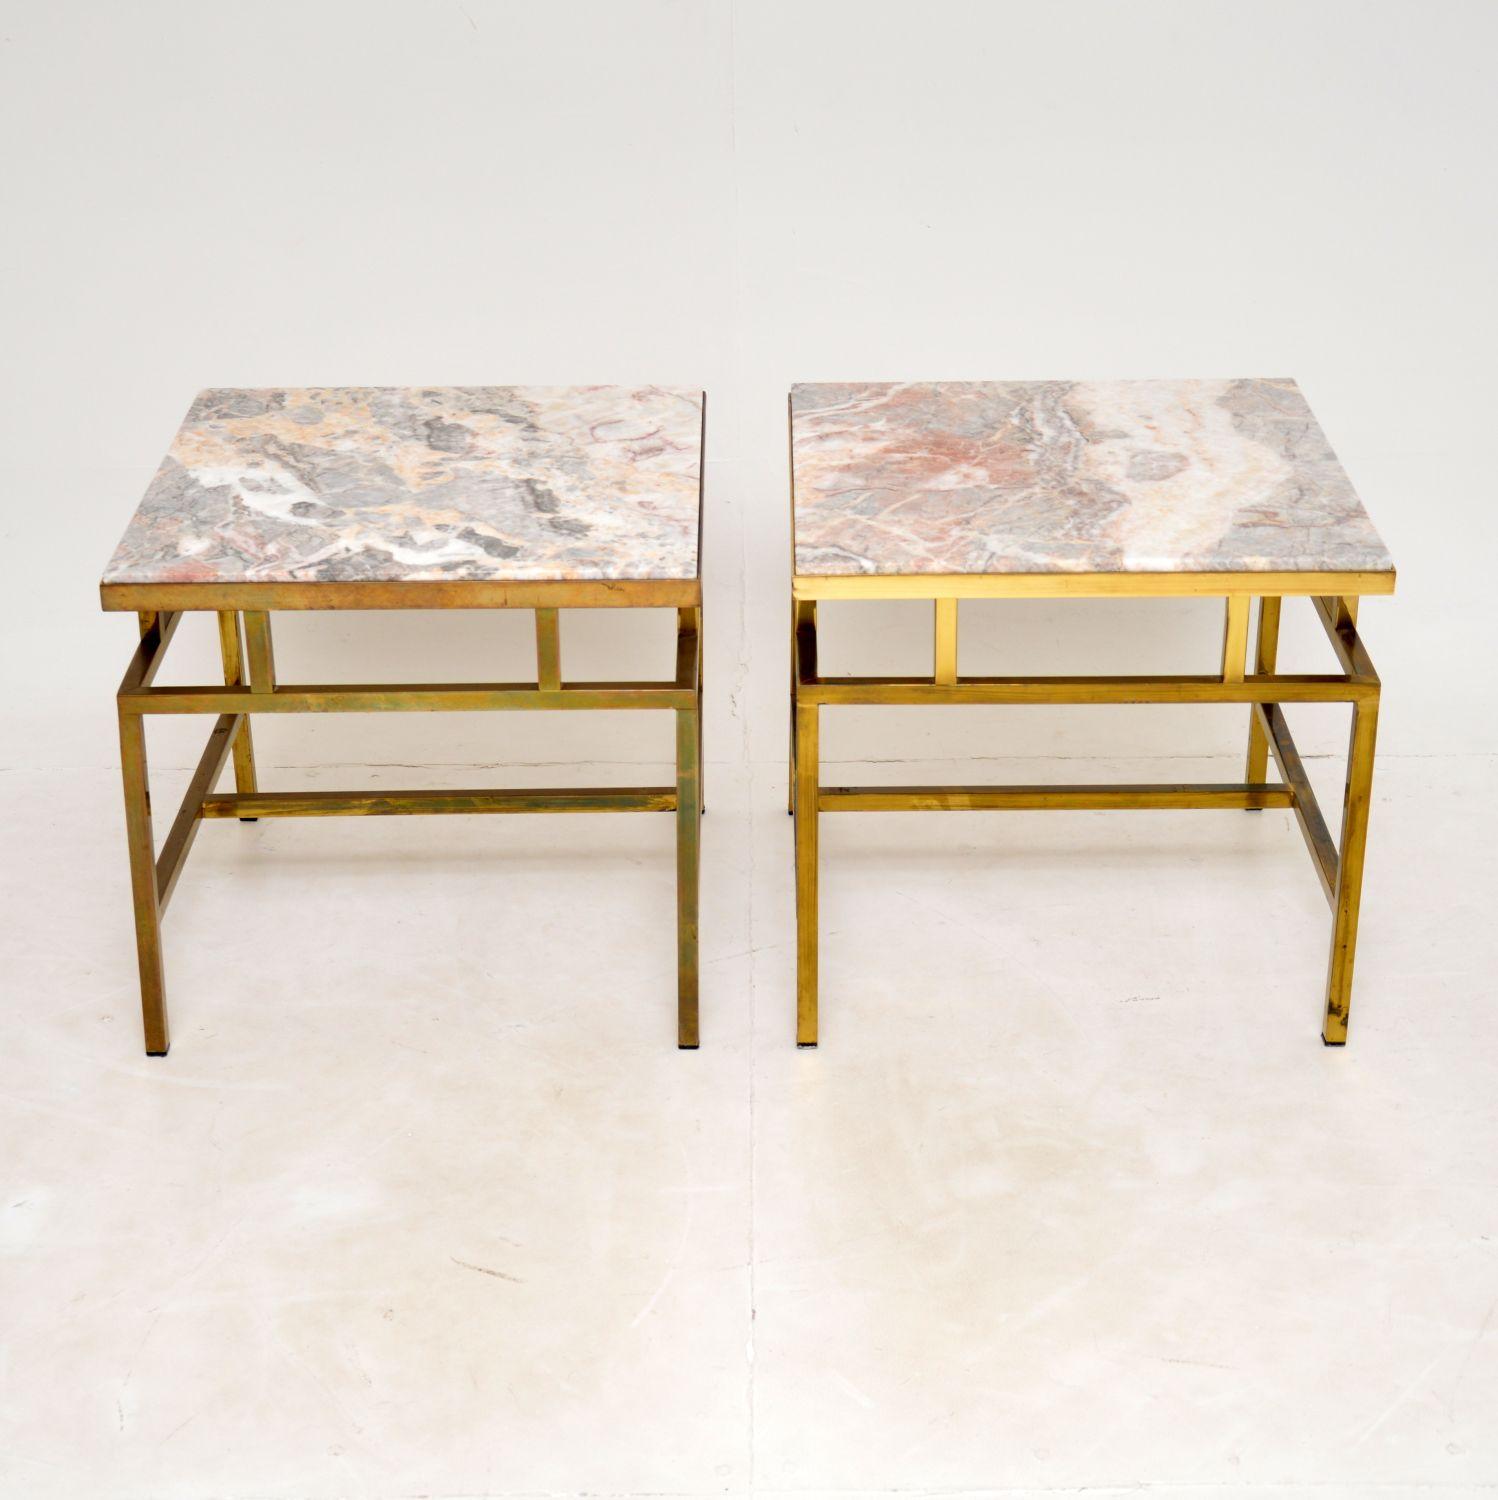 An exceptional pair of vintage side tables in solid brass with marble tops. These were made in Italy, they date from the 1960-1970’s.

They are of superb quality, with beautifully designed frames, and they are a great size.

The brass frames